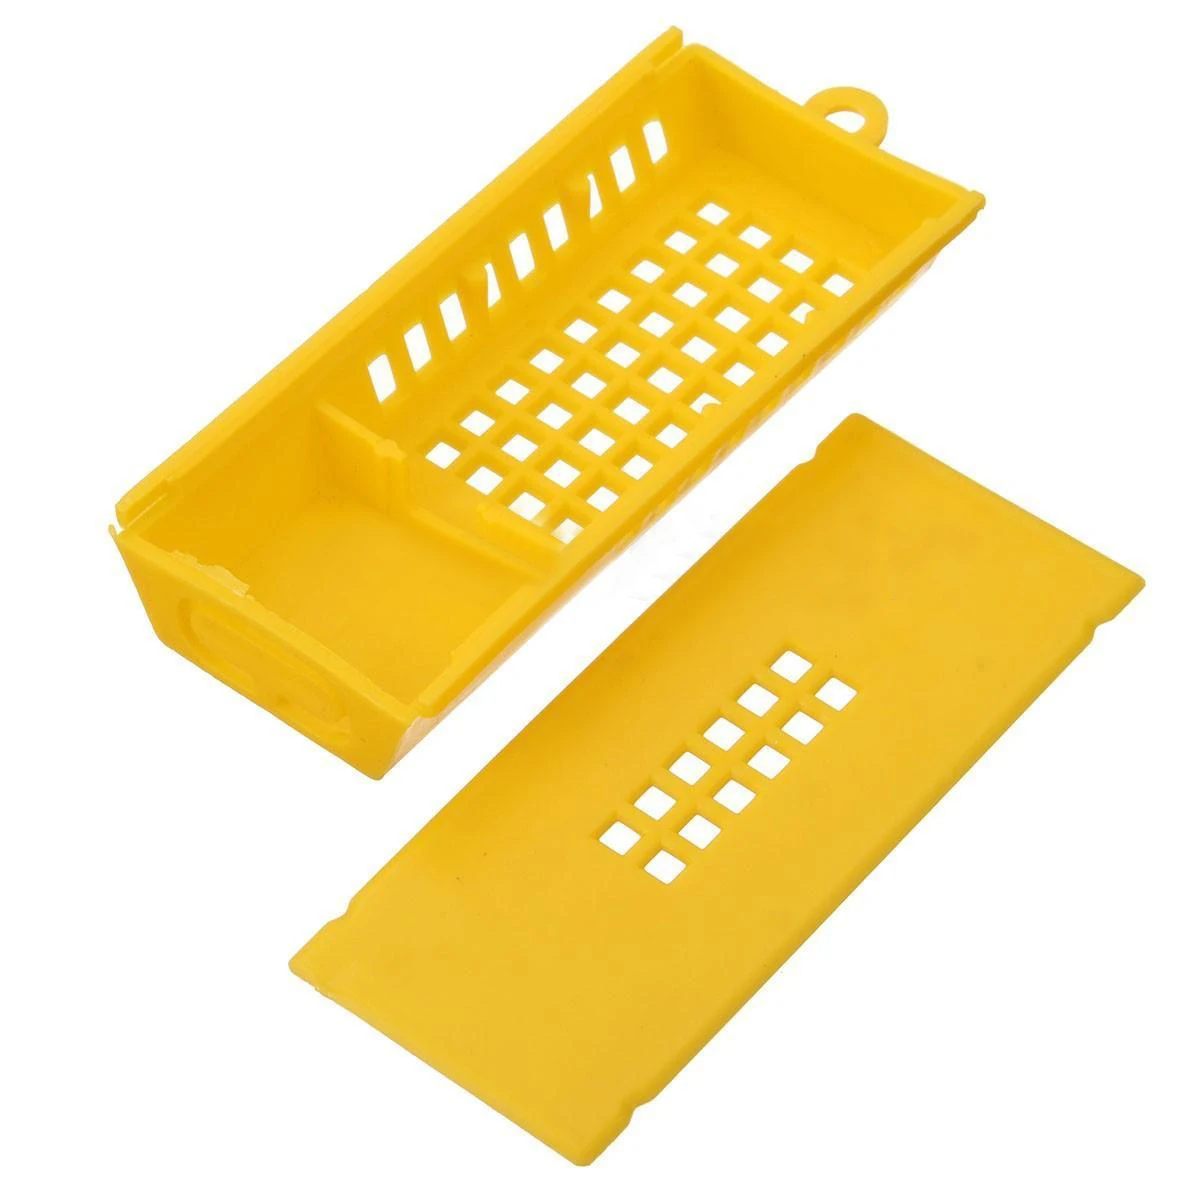 10pcs/lot New Professional Queen Bee Butler Cage Catcher Trap Case Beekeeping Tool